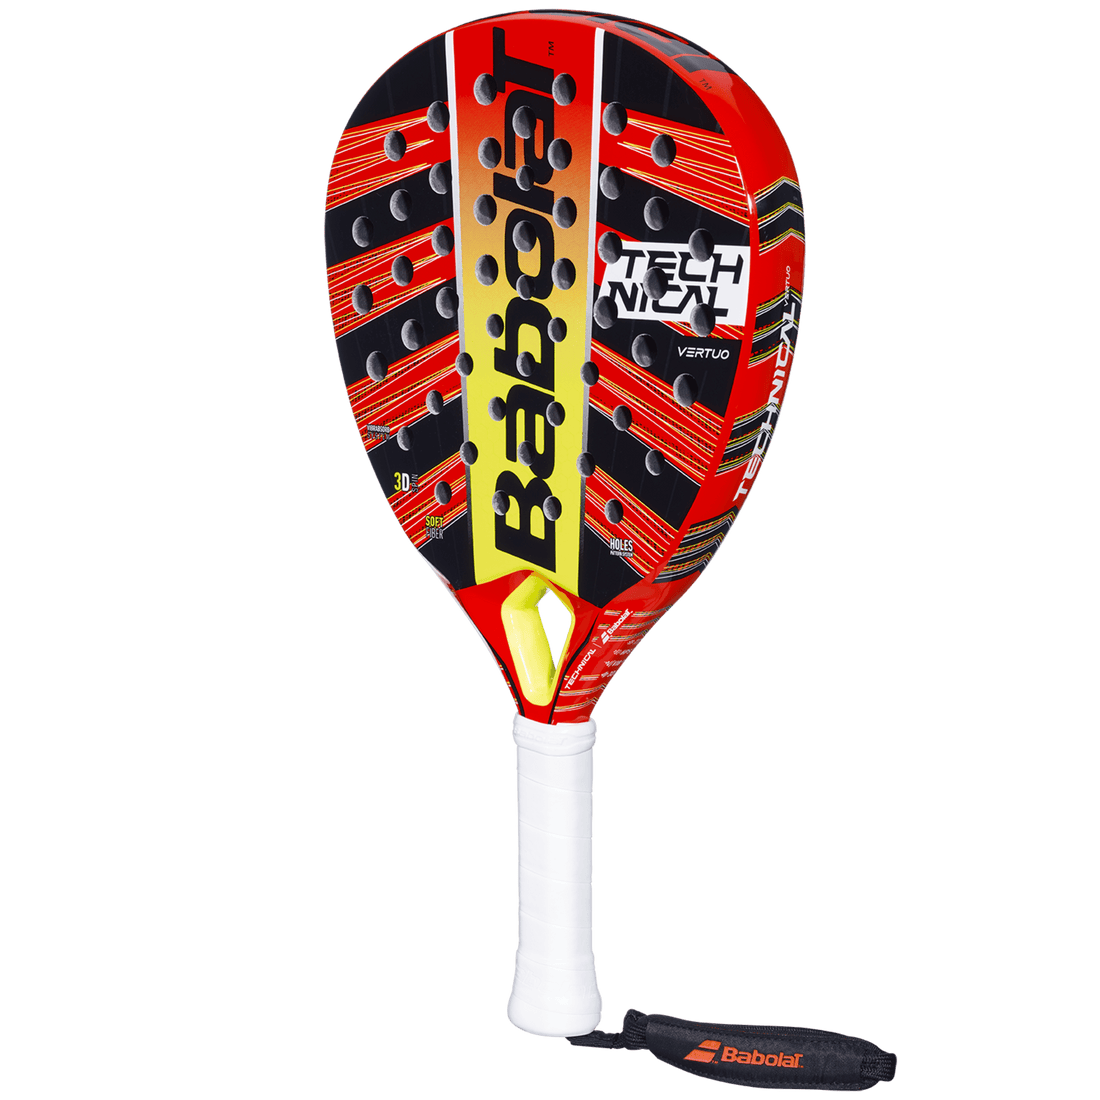 Babolat Technical Vertuo Padel Racket shown from the front.